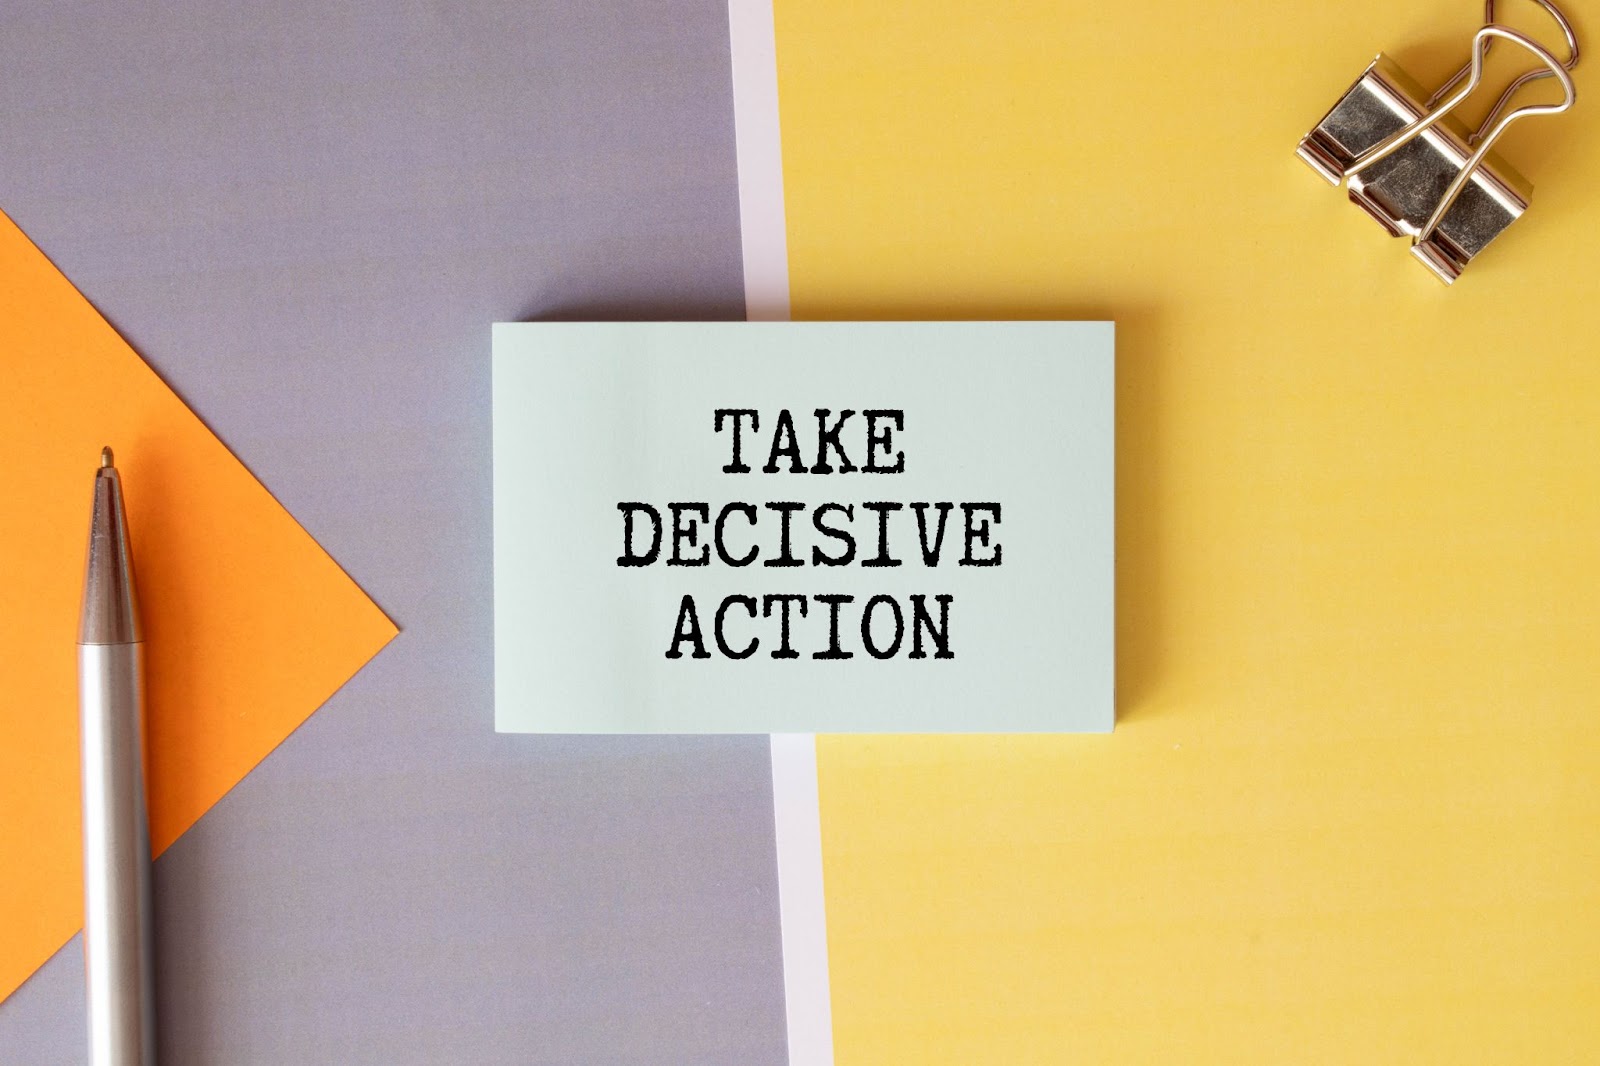 Trust your feelings - take decisive action